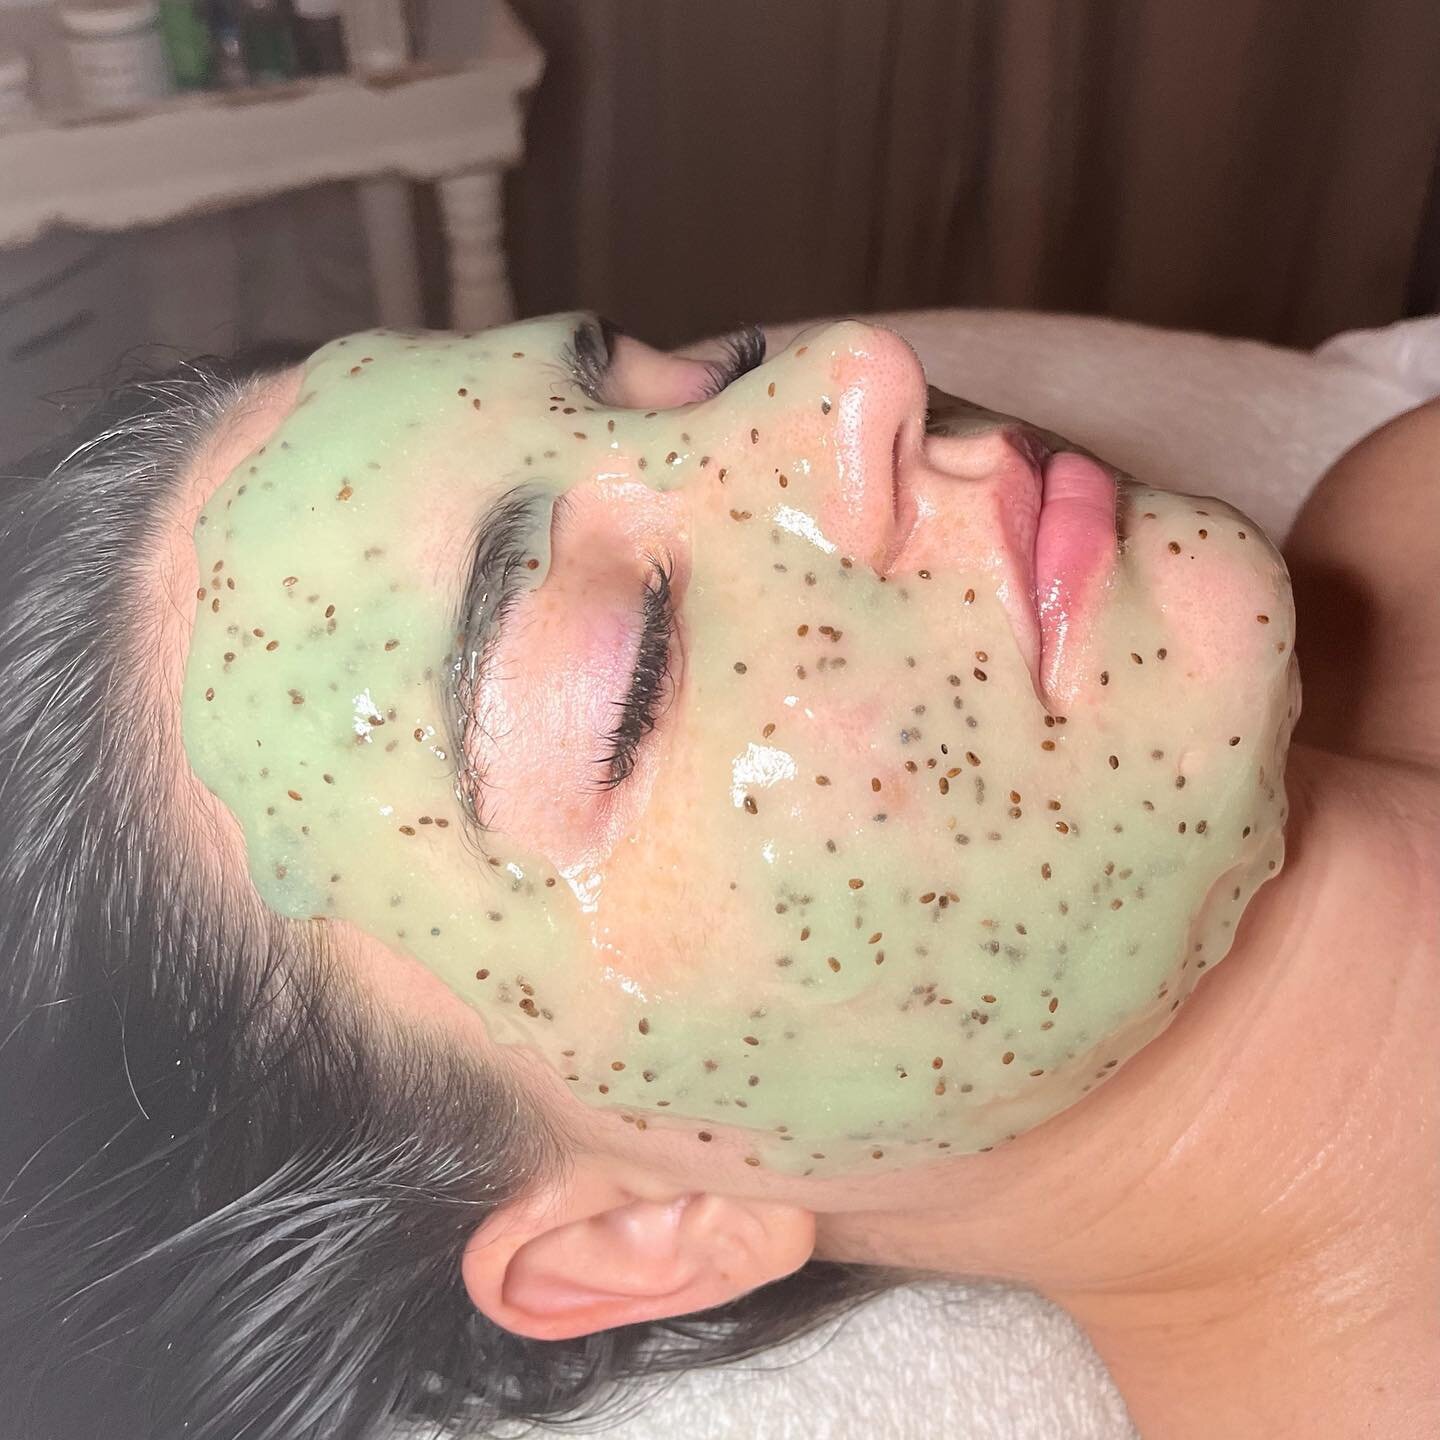 Super Greens Hydrojelly Mask. 🥦🥬
This mask is included in our 4 Layer Restoration Green Facial. 

🍀 Rich in micronutrients to increase energy in the skin.
🍀 Deeply hydrates dry skin by balancing oil and water distribution
🍀 Reduces the apperance